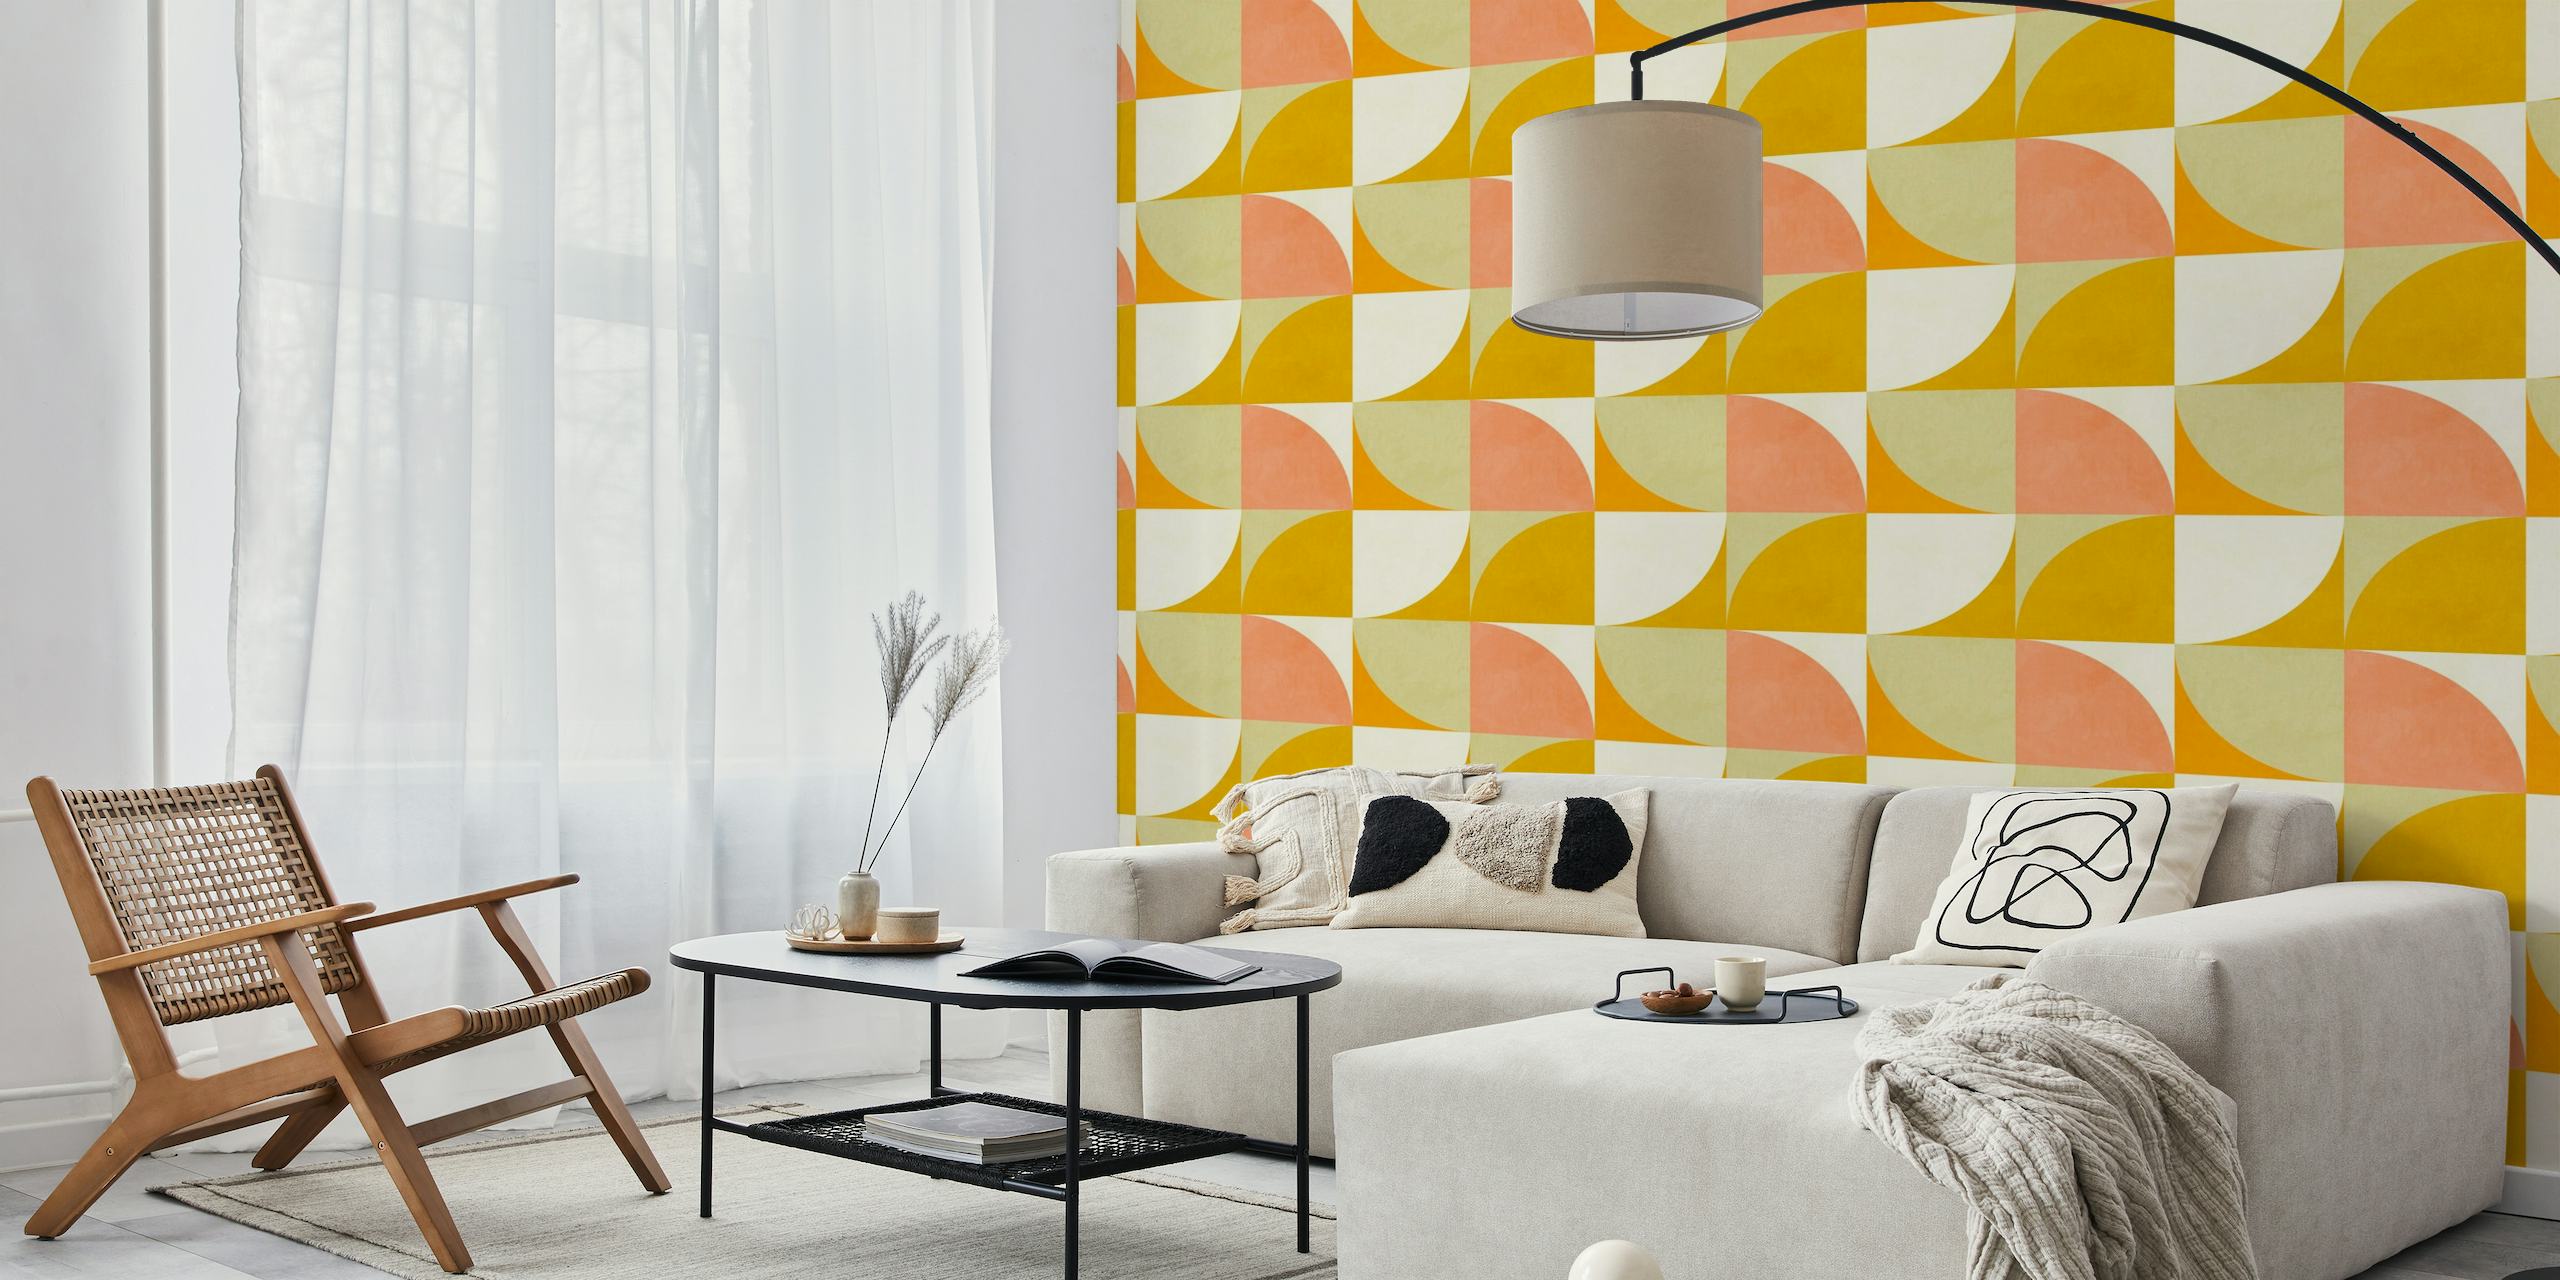 Bauhaus-inspired wall mural with bold geometric shapes in red, orange, and yellow hues